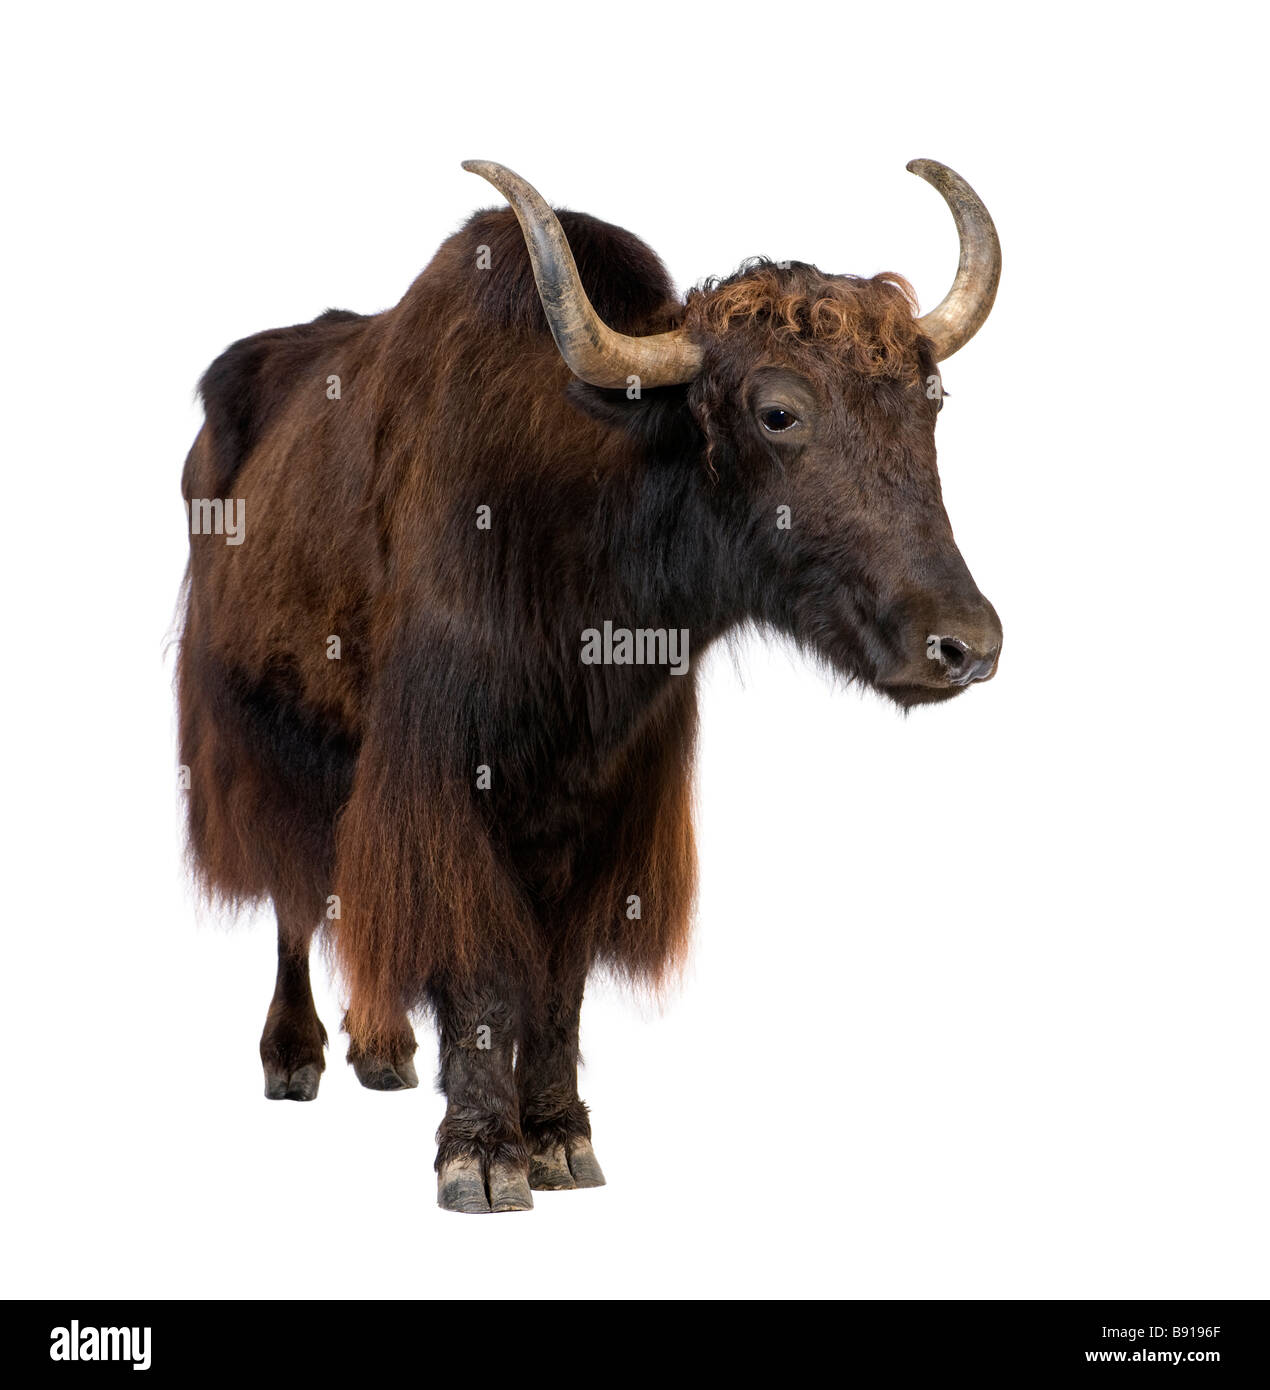 Yak in front of a white background Stock Photo